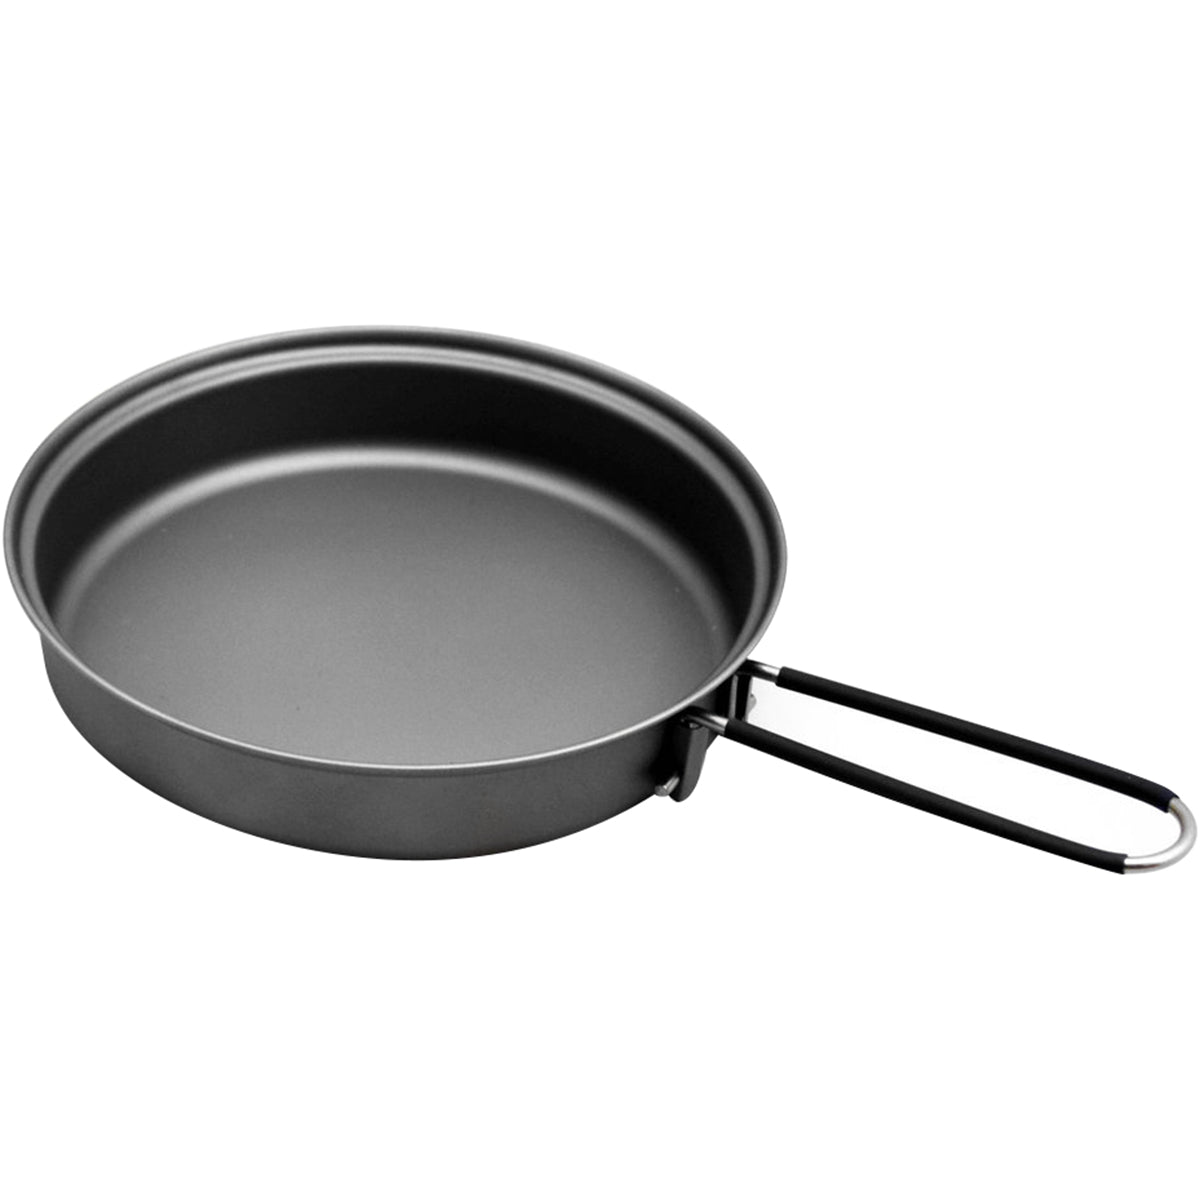 TOAKS Titanium Frying Pan with Foldable Handle - 145mm TOAKS